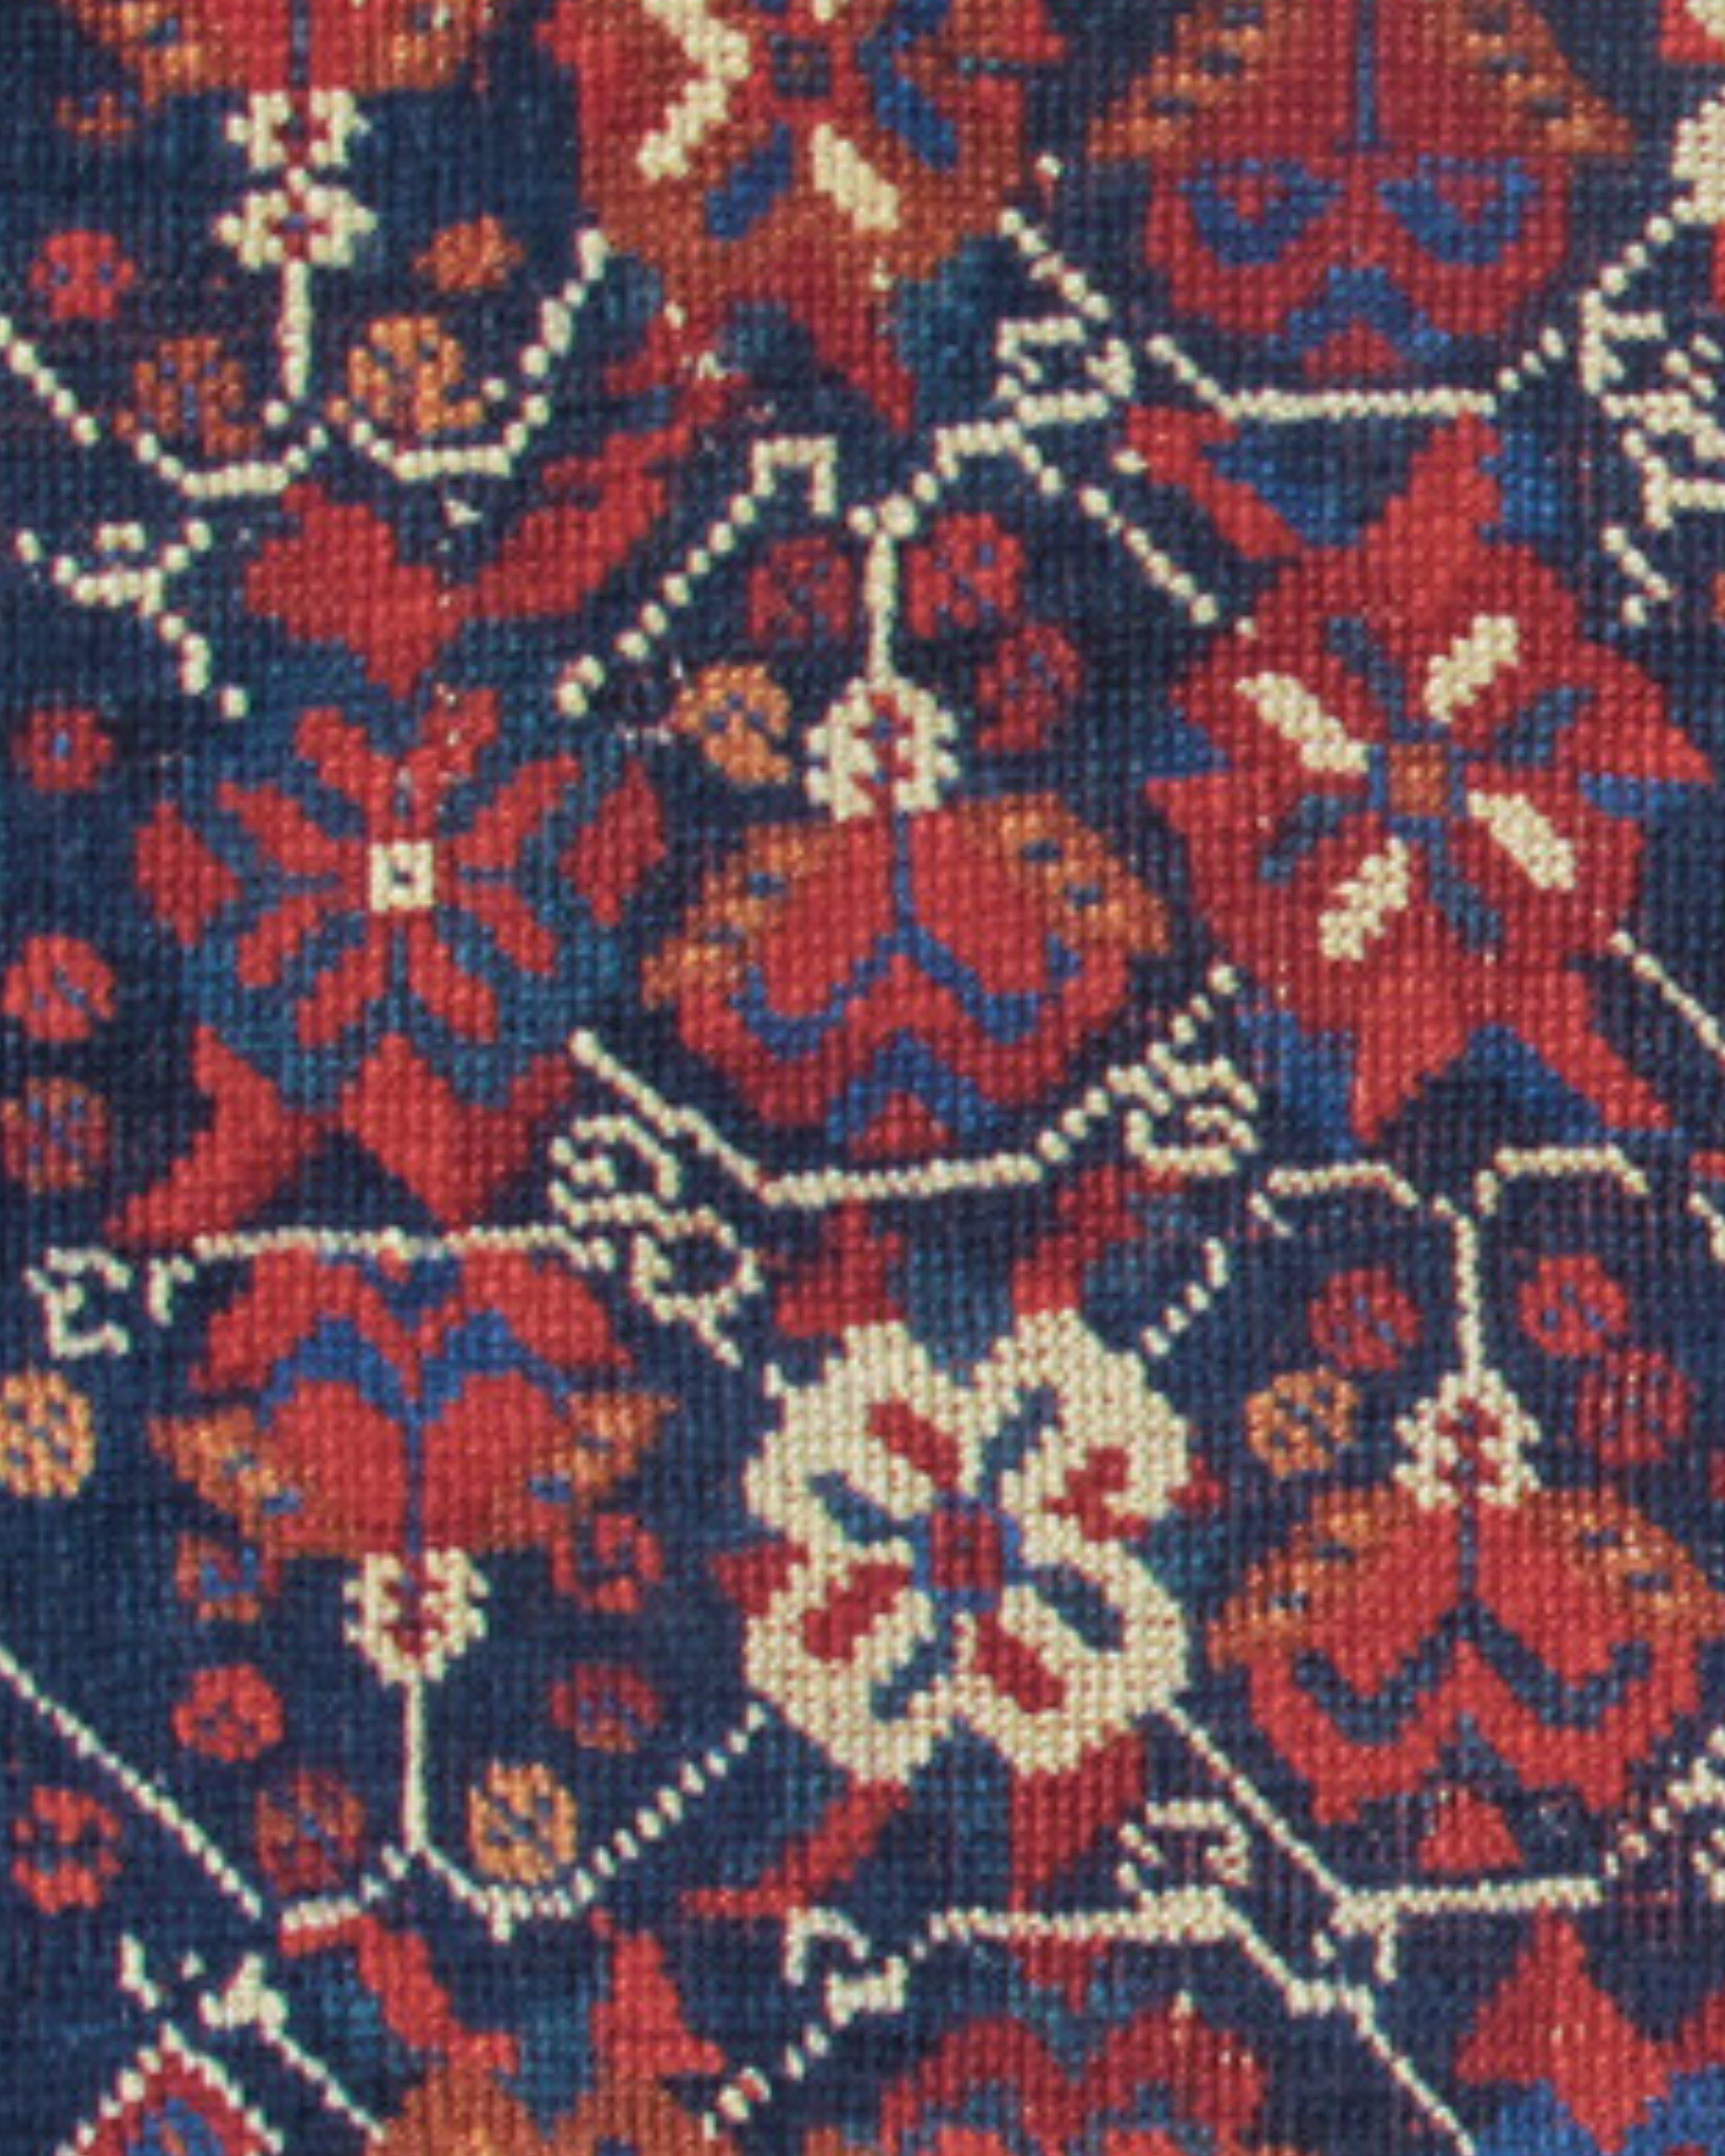 Antique Persian Afshar Bagface Bag, Late 19th Century

This charming Afshar bag face uses rich saturated vegetable colors and soft glossy wool, with rows of alternating flowers and blossom heads drawn against the indigo field. The vegetal repertoire